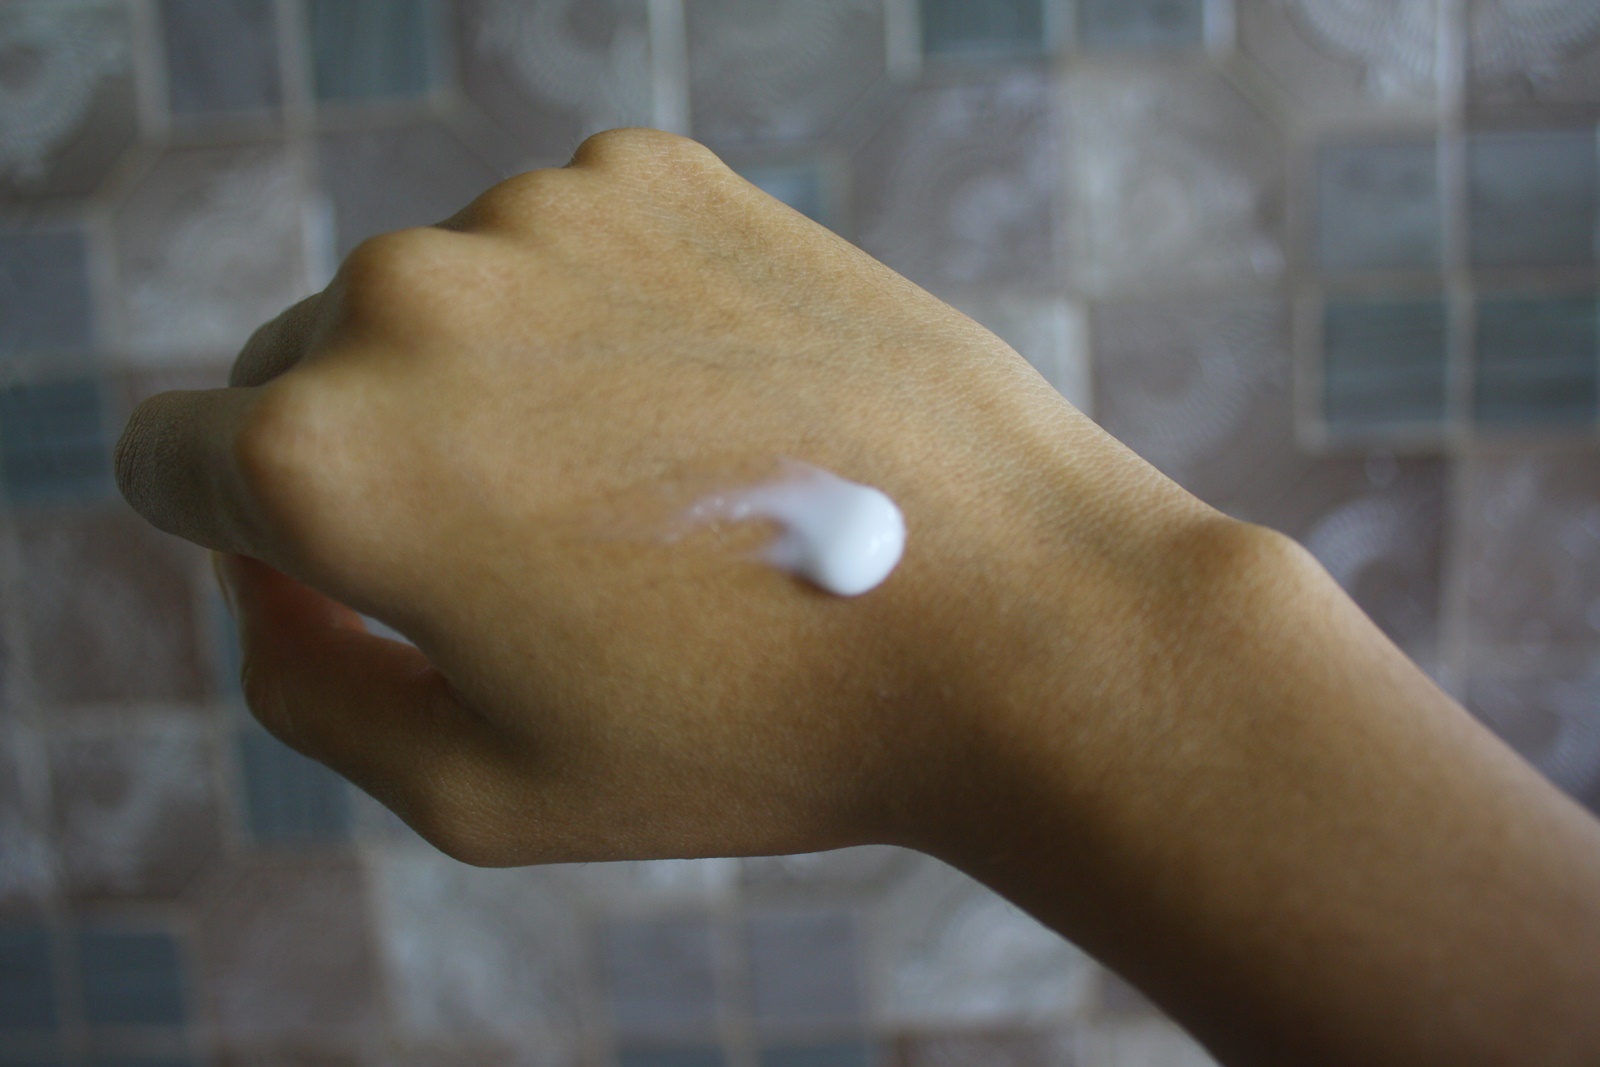  Body  Care Review Vaseline Hand  Cream Anti Bac The 